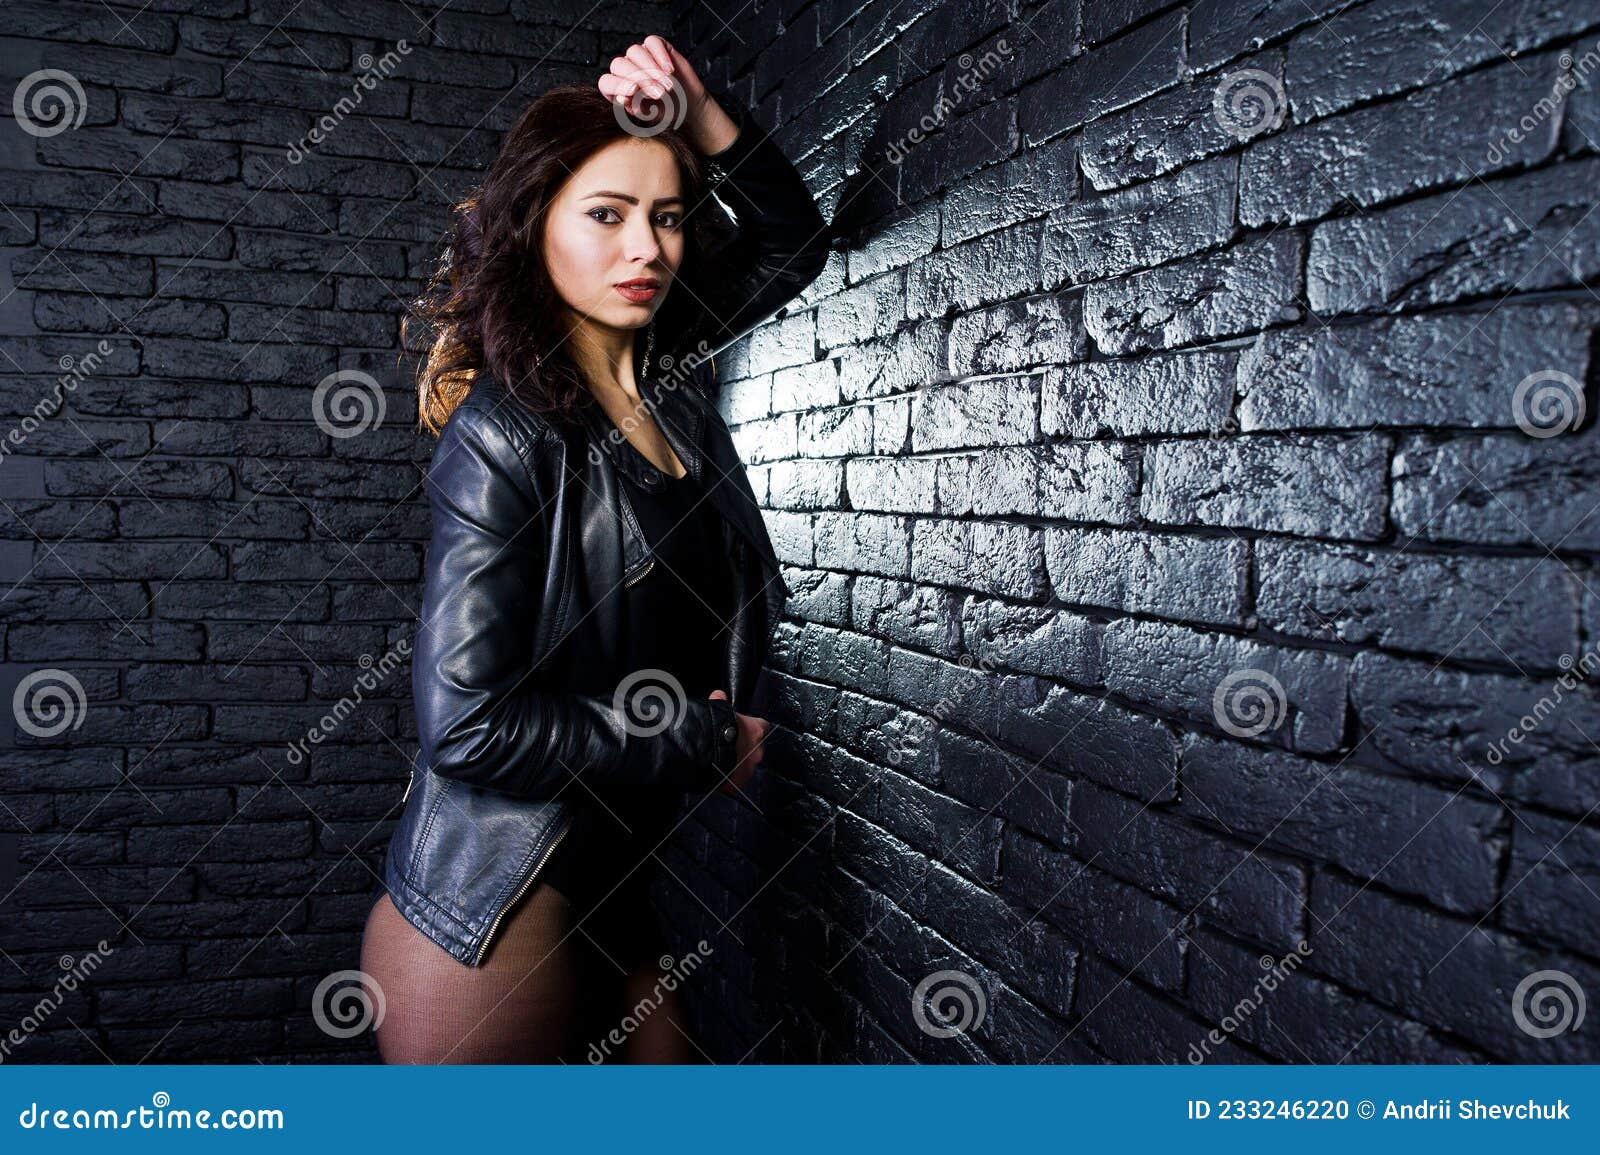 241 Model Sexy Lingerie Leather Jacket Stock Photos - Free